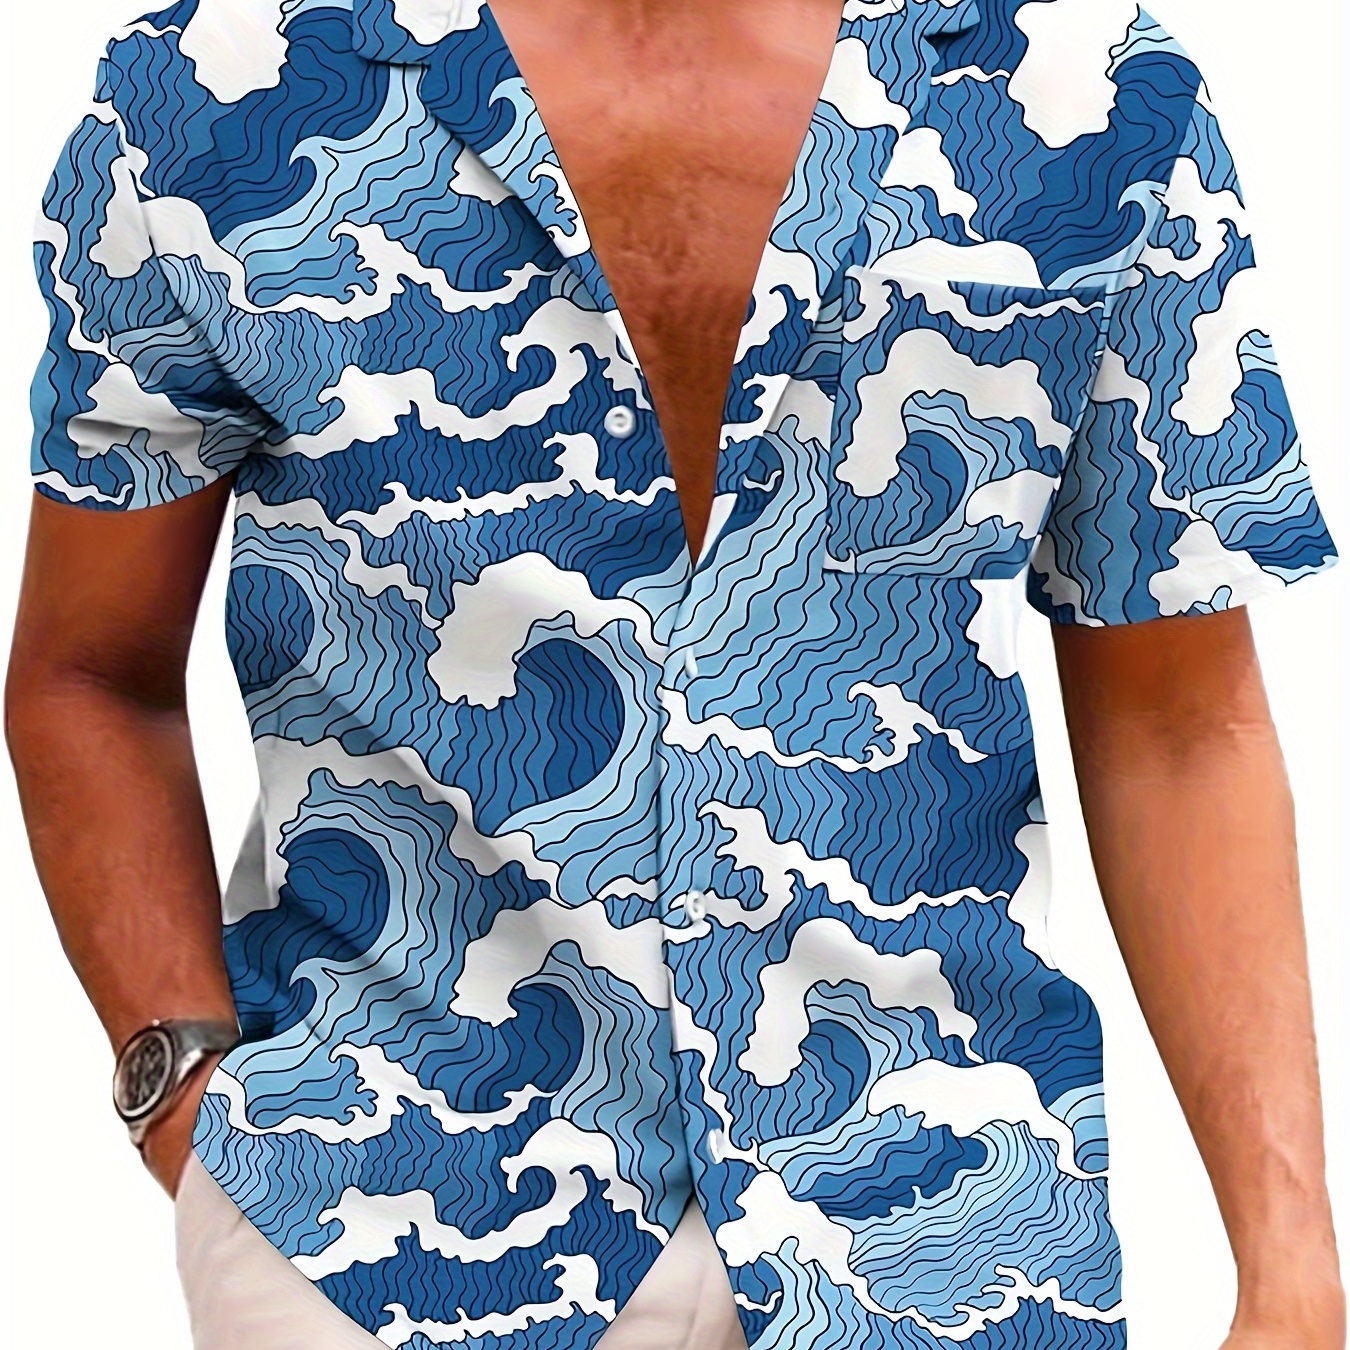 

Kyku New Casual Style Men's Printed Coconut Tree Pattern Short Sleeved Button Up Shirt For Leisure Vacation Seaside Coconut Tree Summer Seasonal Fashion Shirt Button Up Shirt